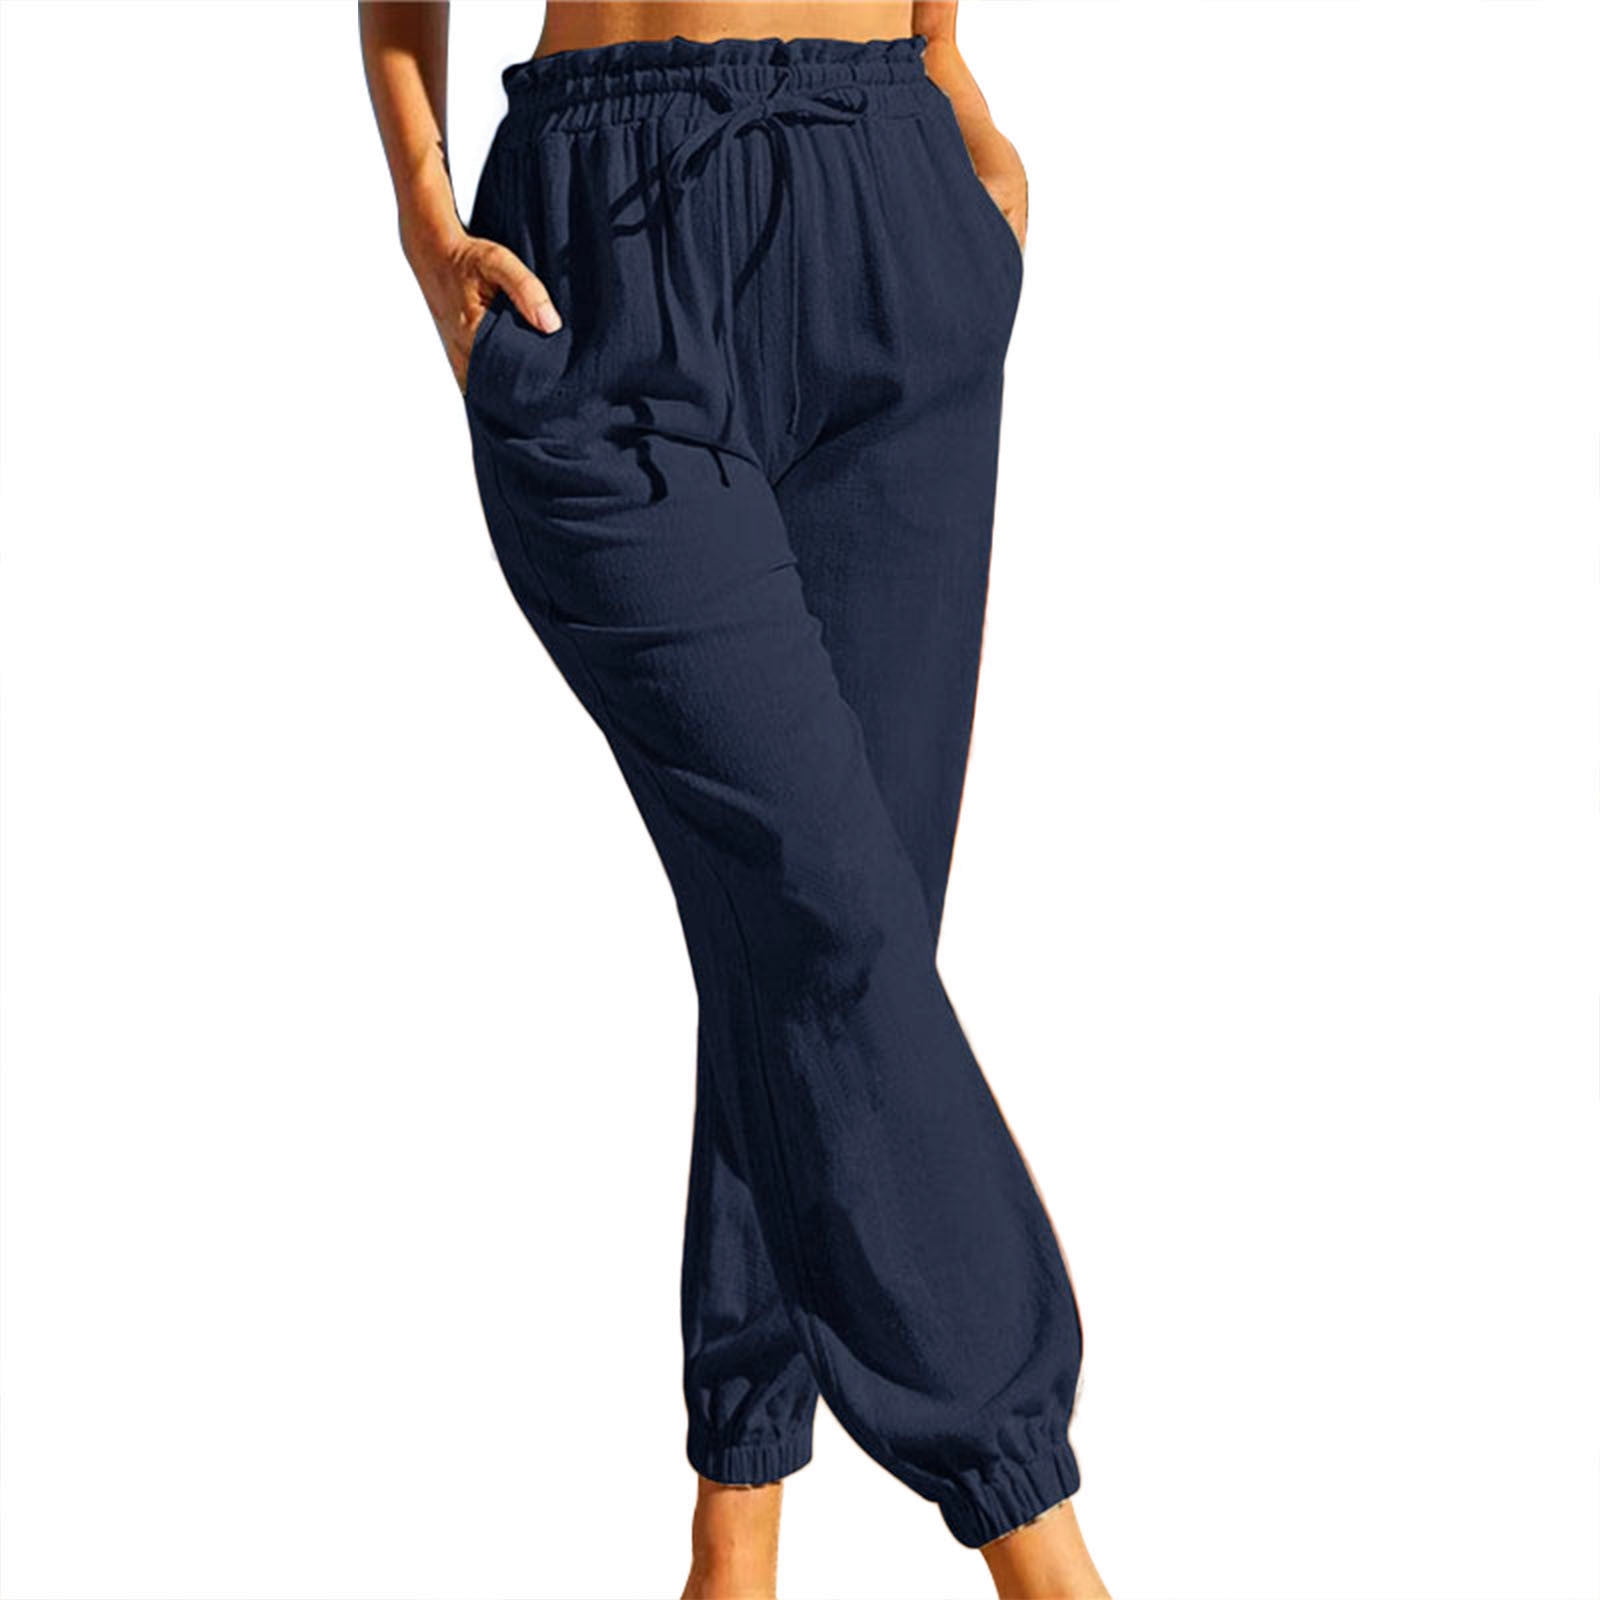 ZIZOCWA Girls Lounge Pants Womens Pants Casual Work Size 16 Womens Casual Elastic  Waist Solid Comfy Casual Cotton Linen Pants With Pockets Zip Up Pants Women  